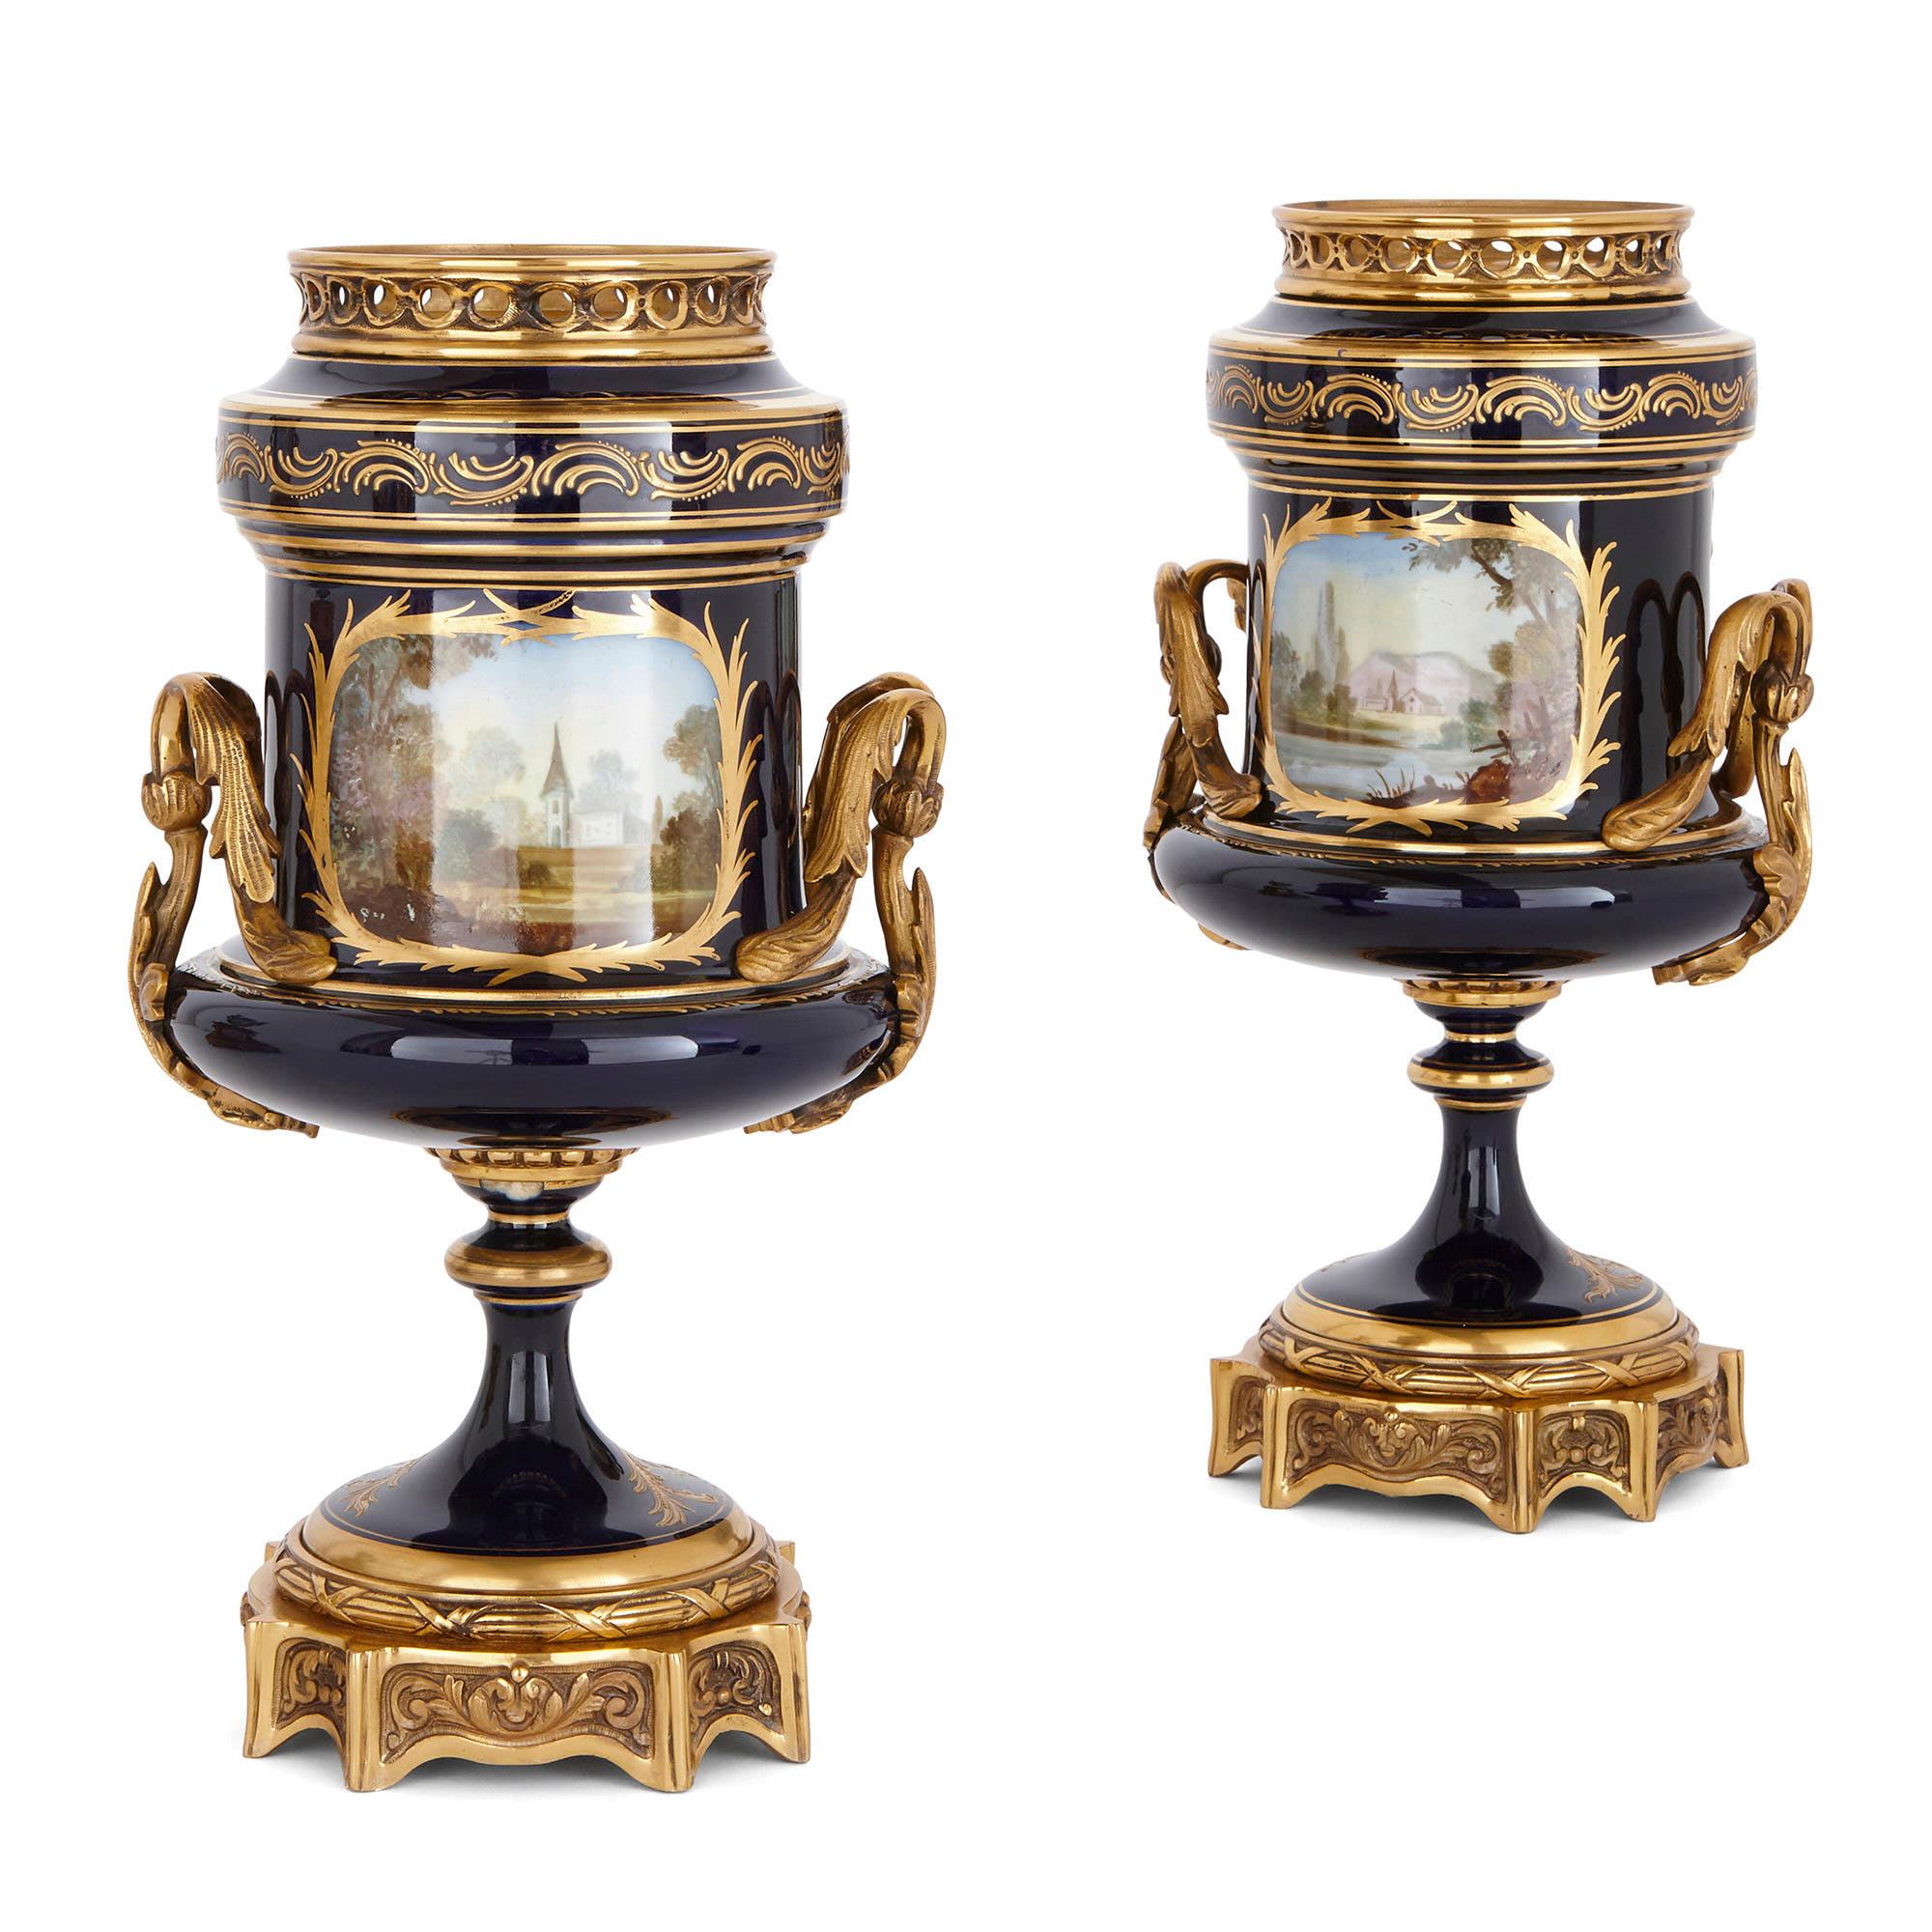 19th Century Rococo Style Gilt Bronze and Porcelain Matched Clock Set